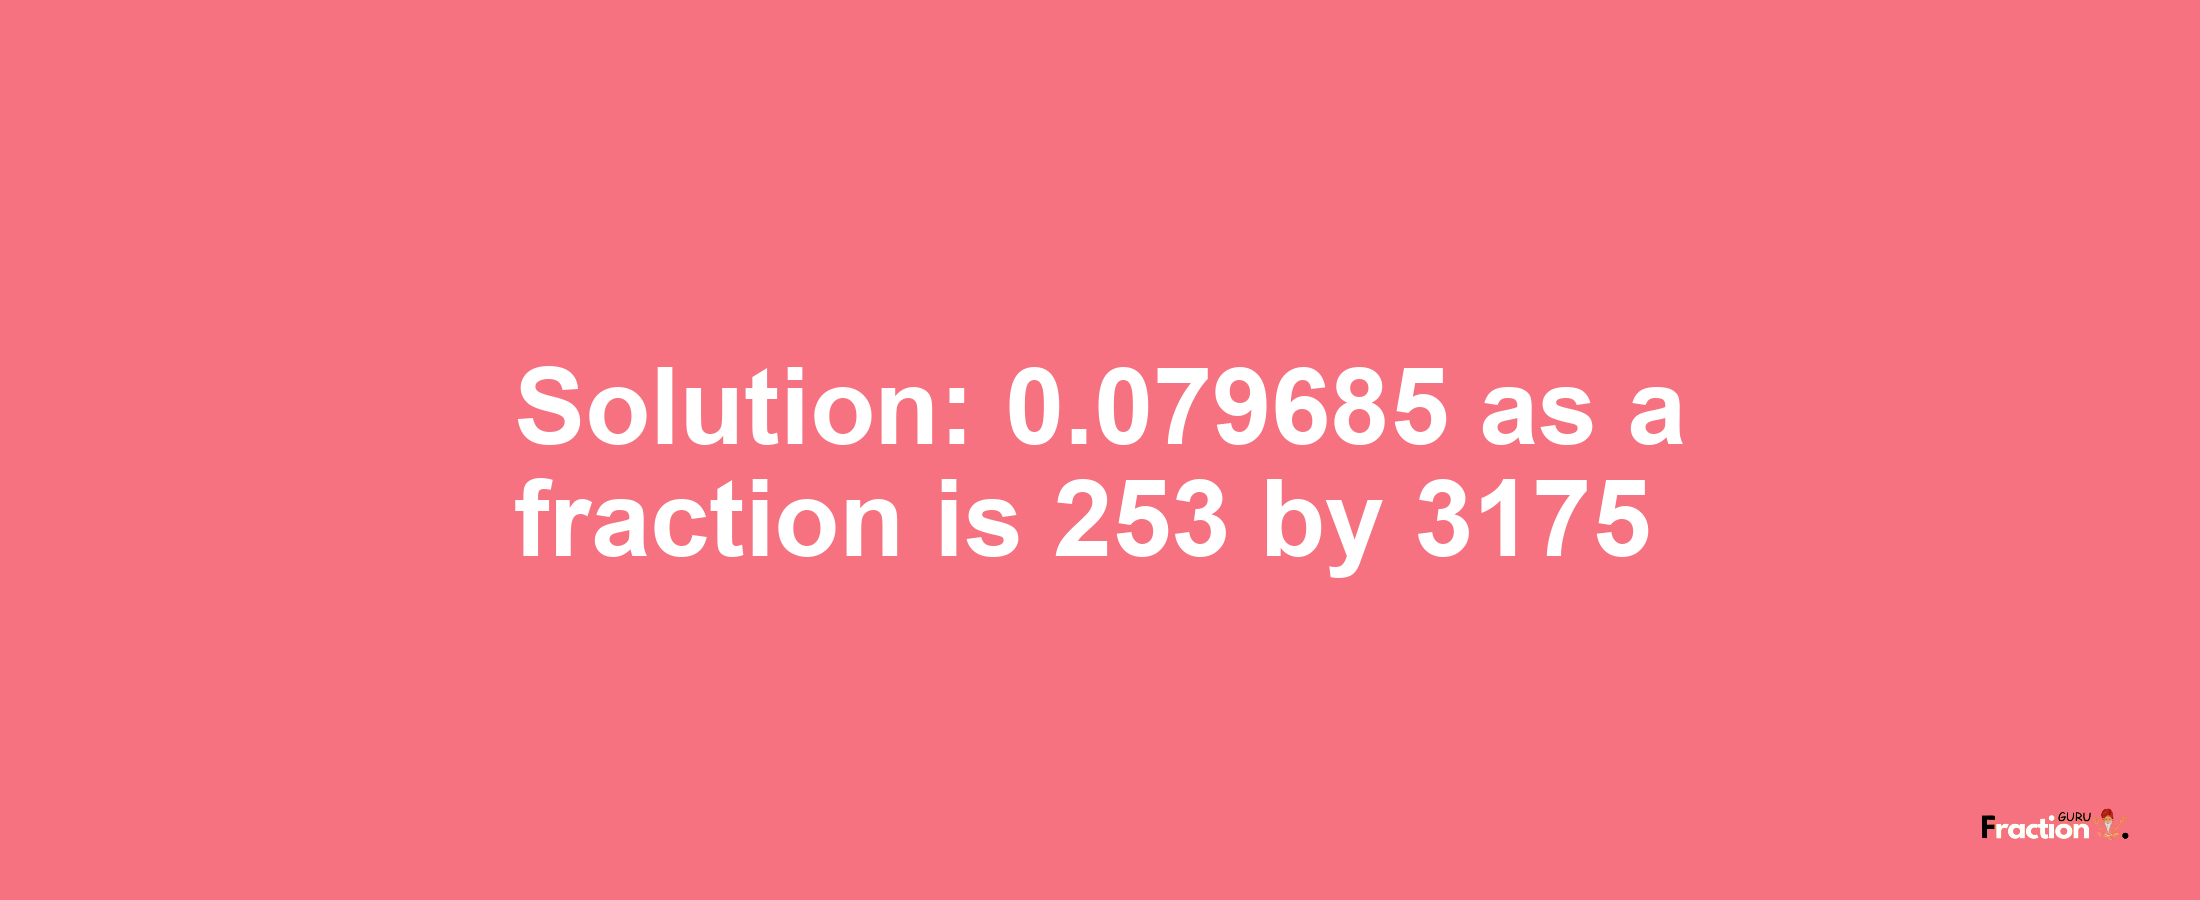 Solution:0.079685 as a fraction is 253/3175